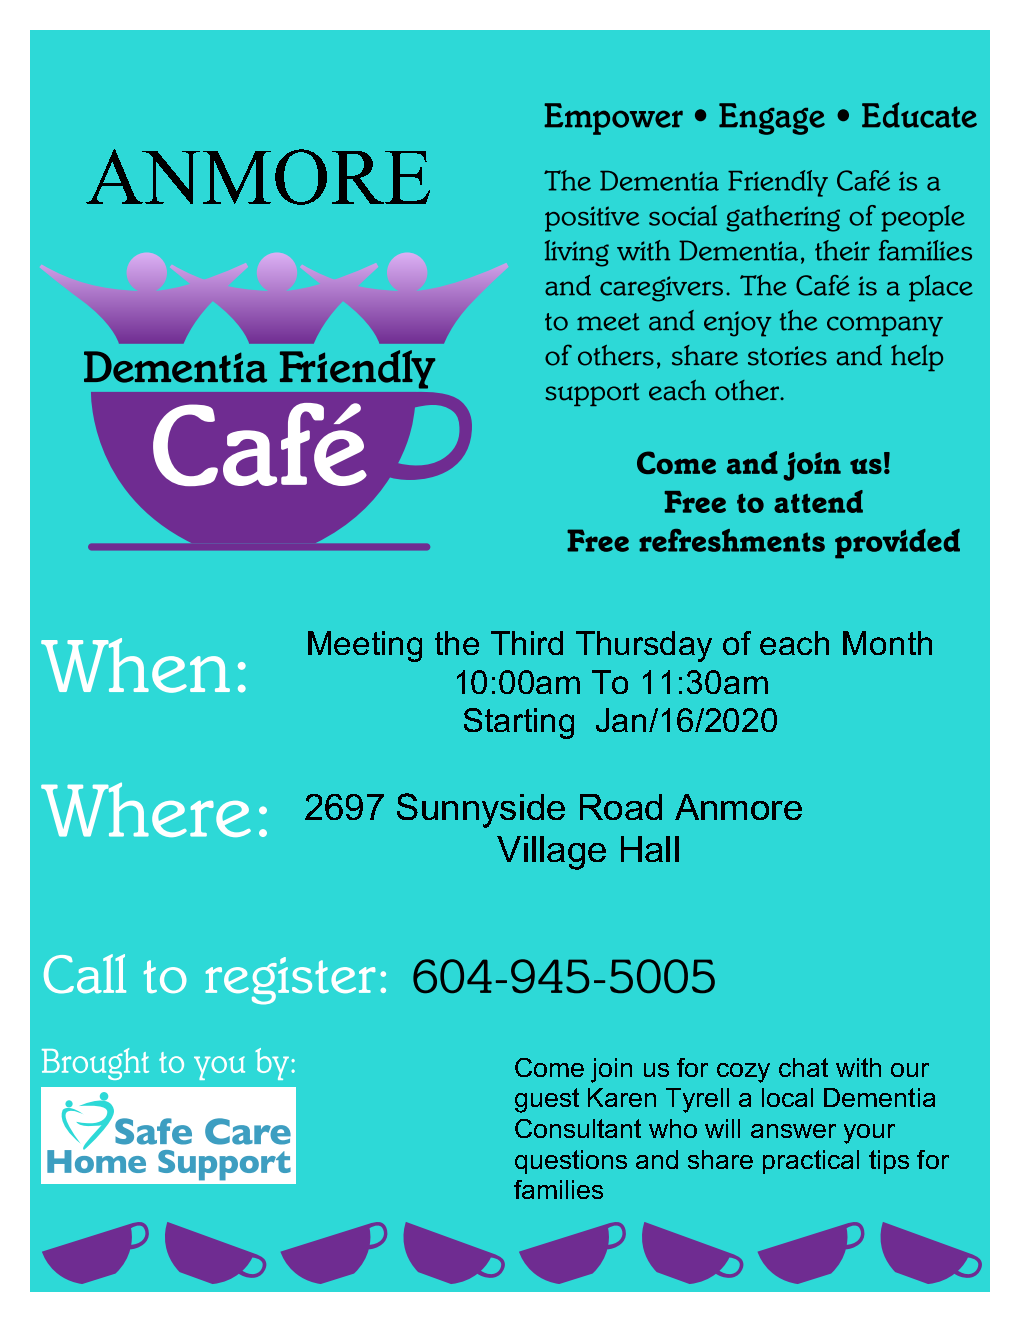 Anmore Dementia Friendly Cafepng_Page1